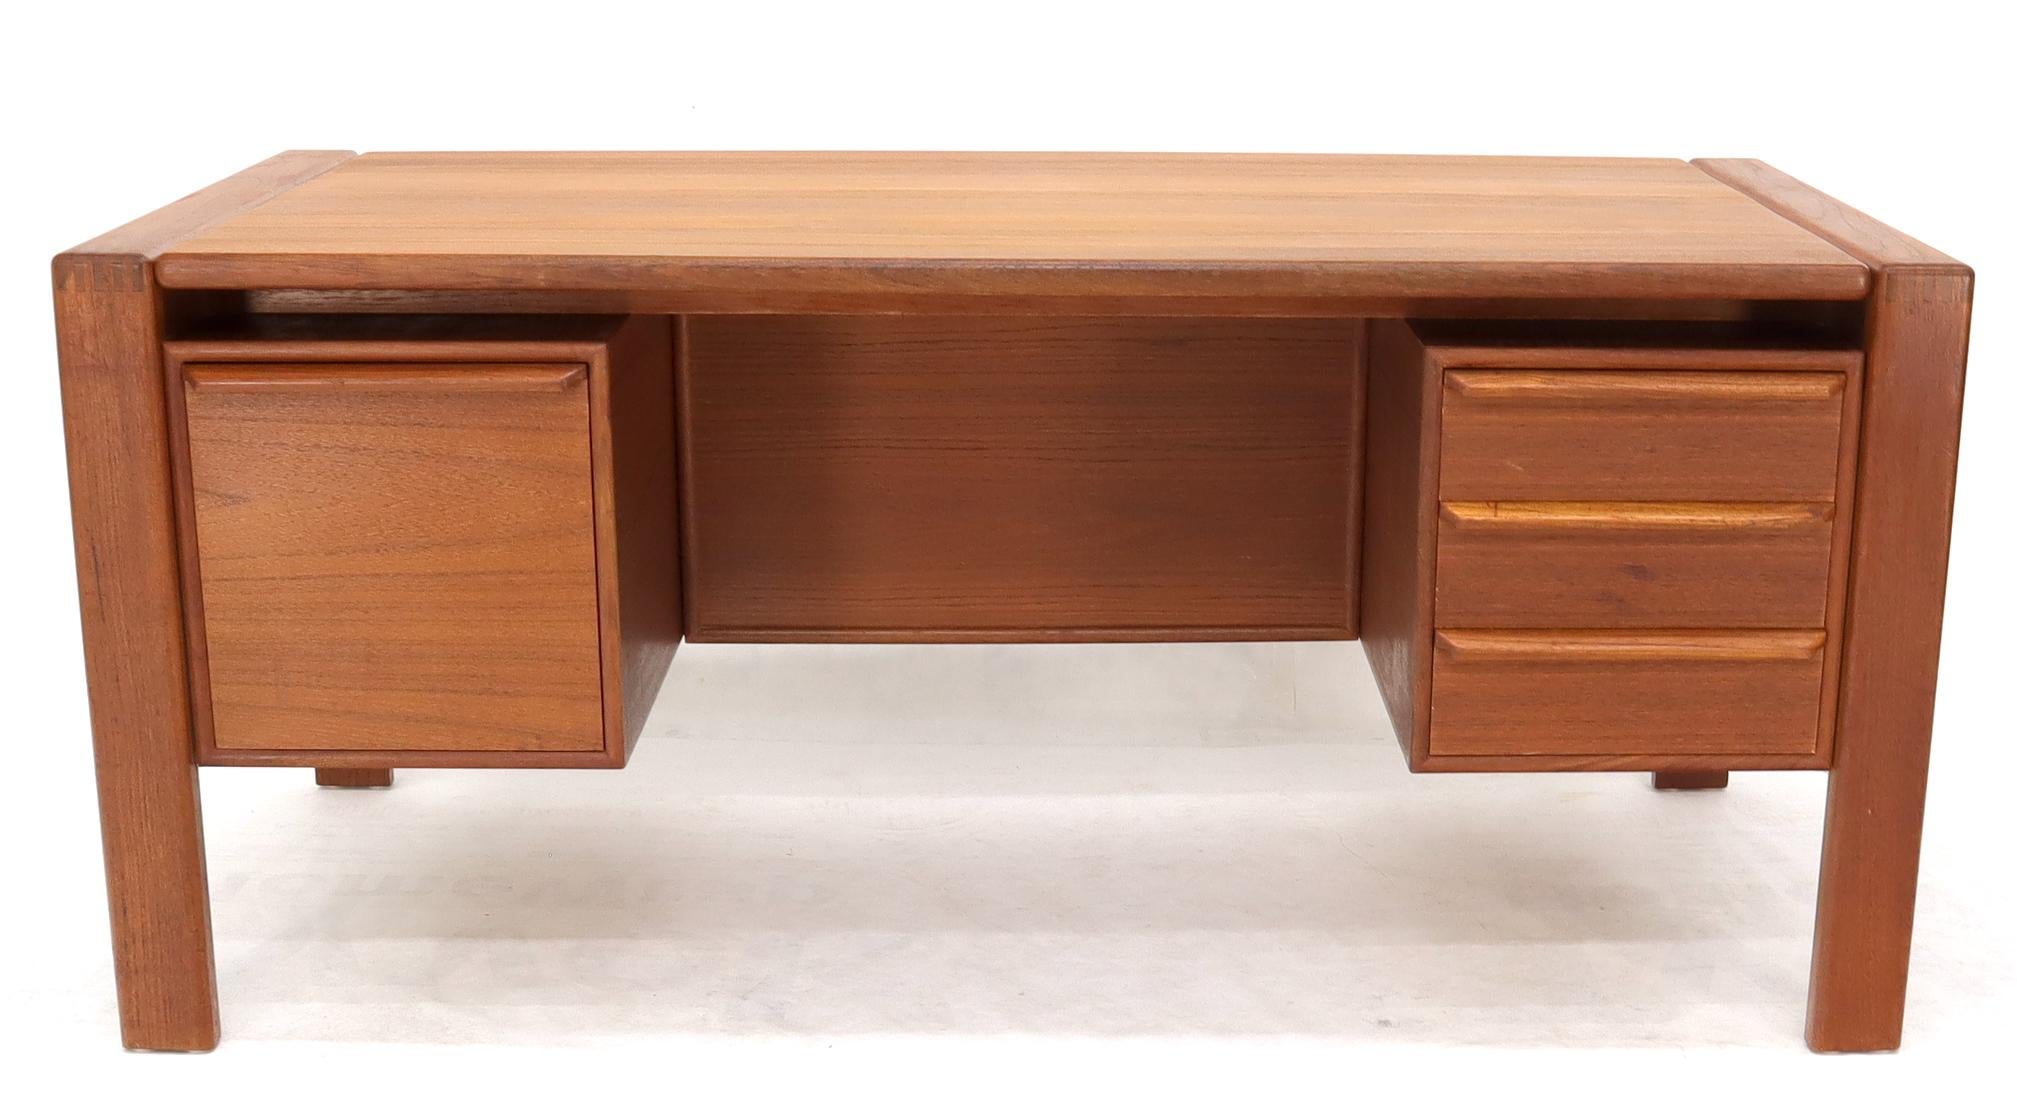 Lacquered Executive Solid Teak Midcentury Danish Modern Desk with Bookcase and File Drawer